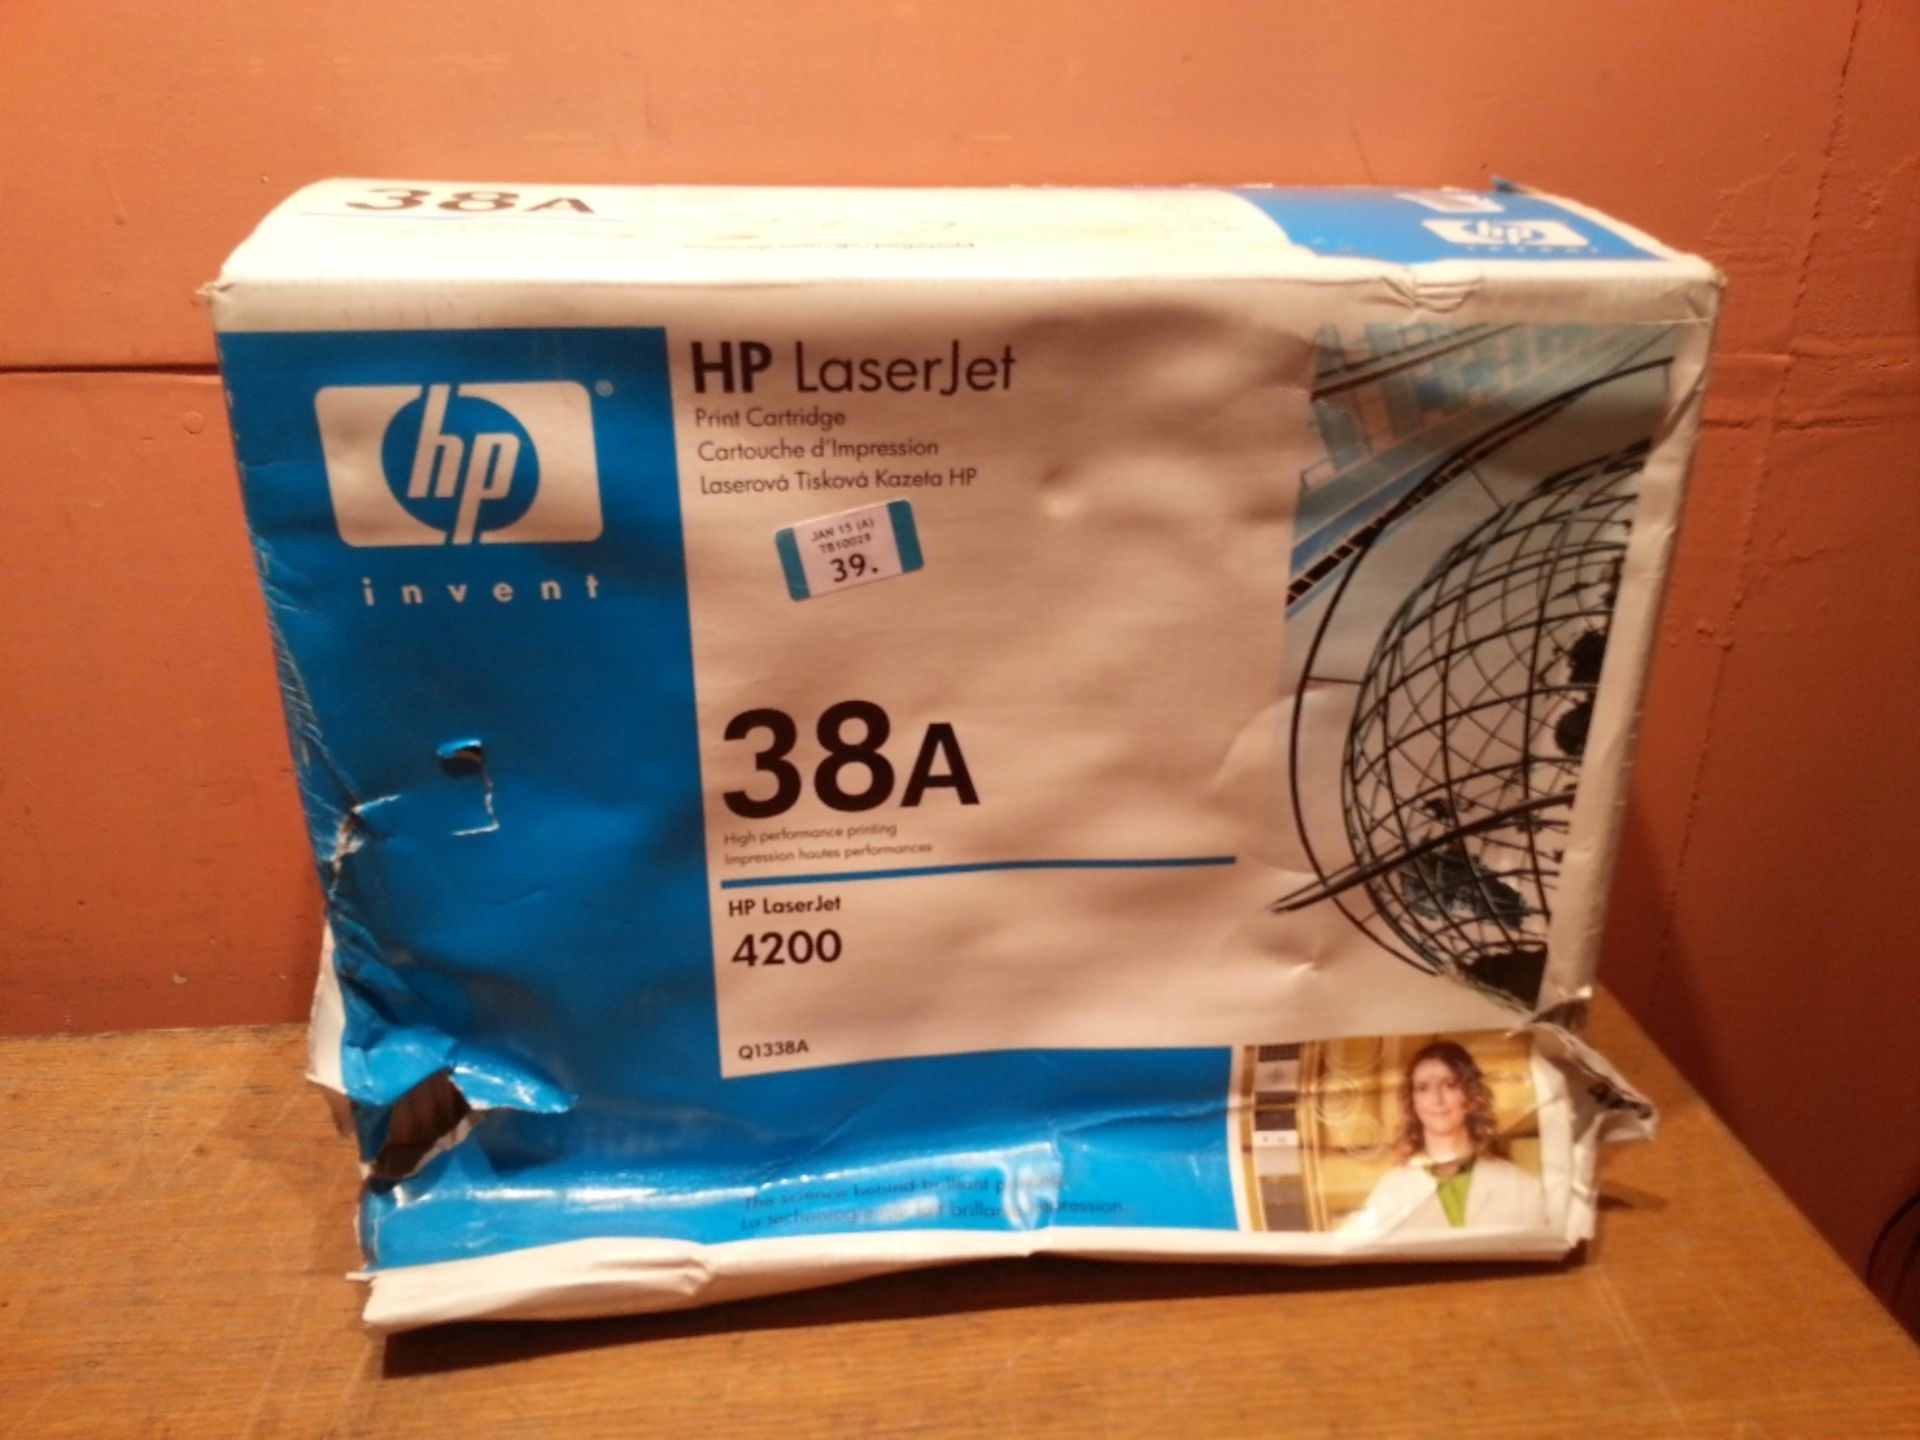 HP  Original Q1338A 38A Toner Cartridge For 4200 - Sealed In Box - Outer box damaged